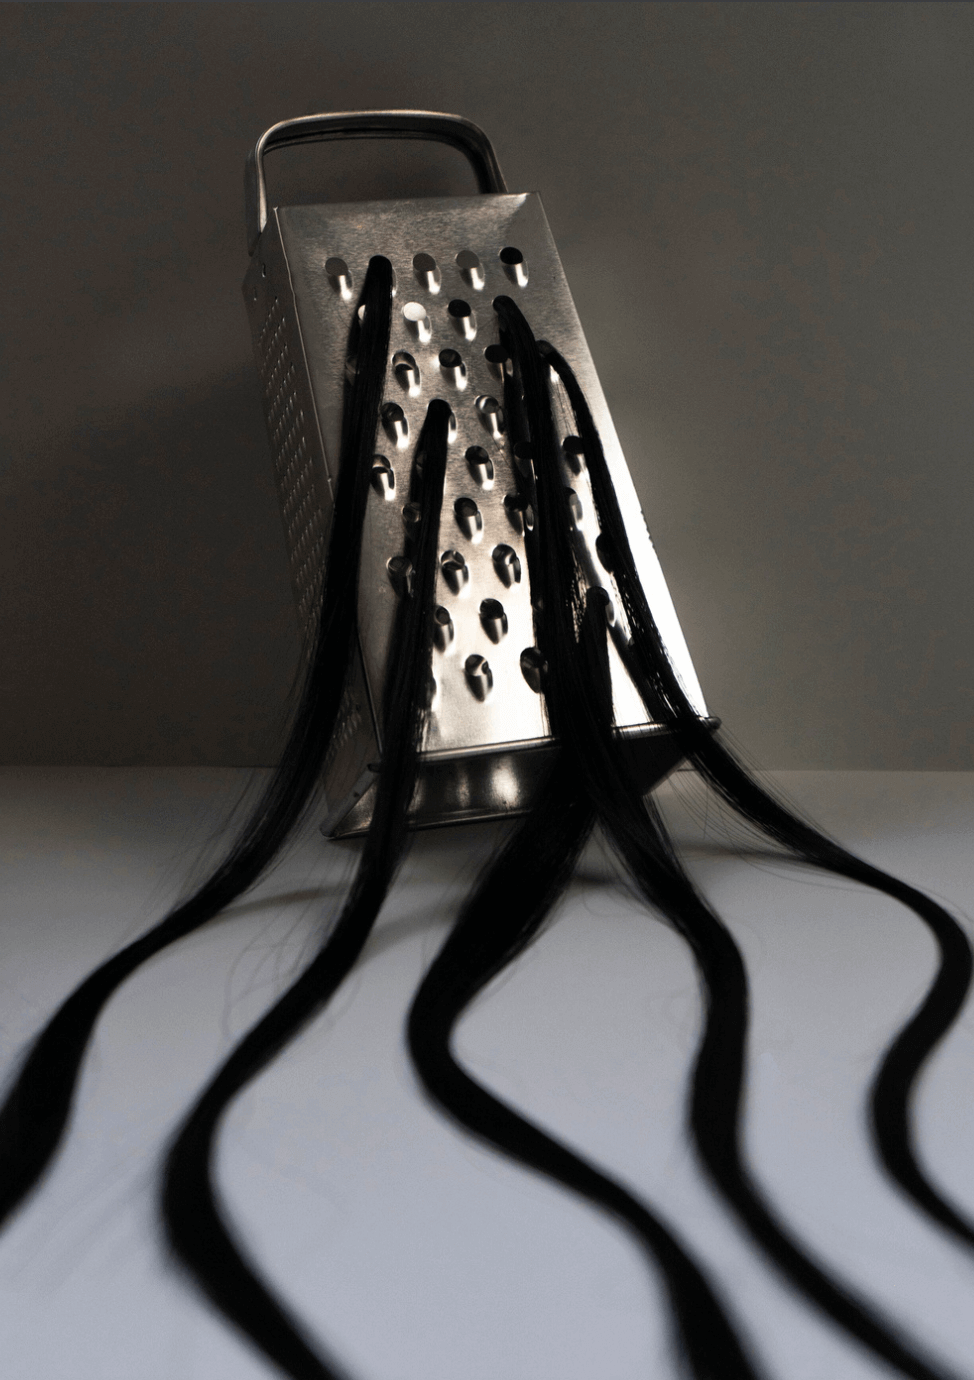 The Hairy Grater by Diana Dău